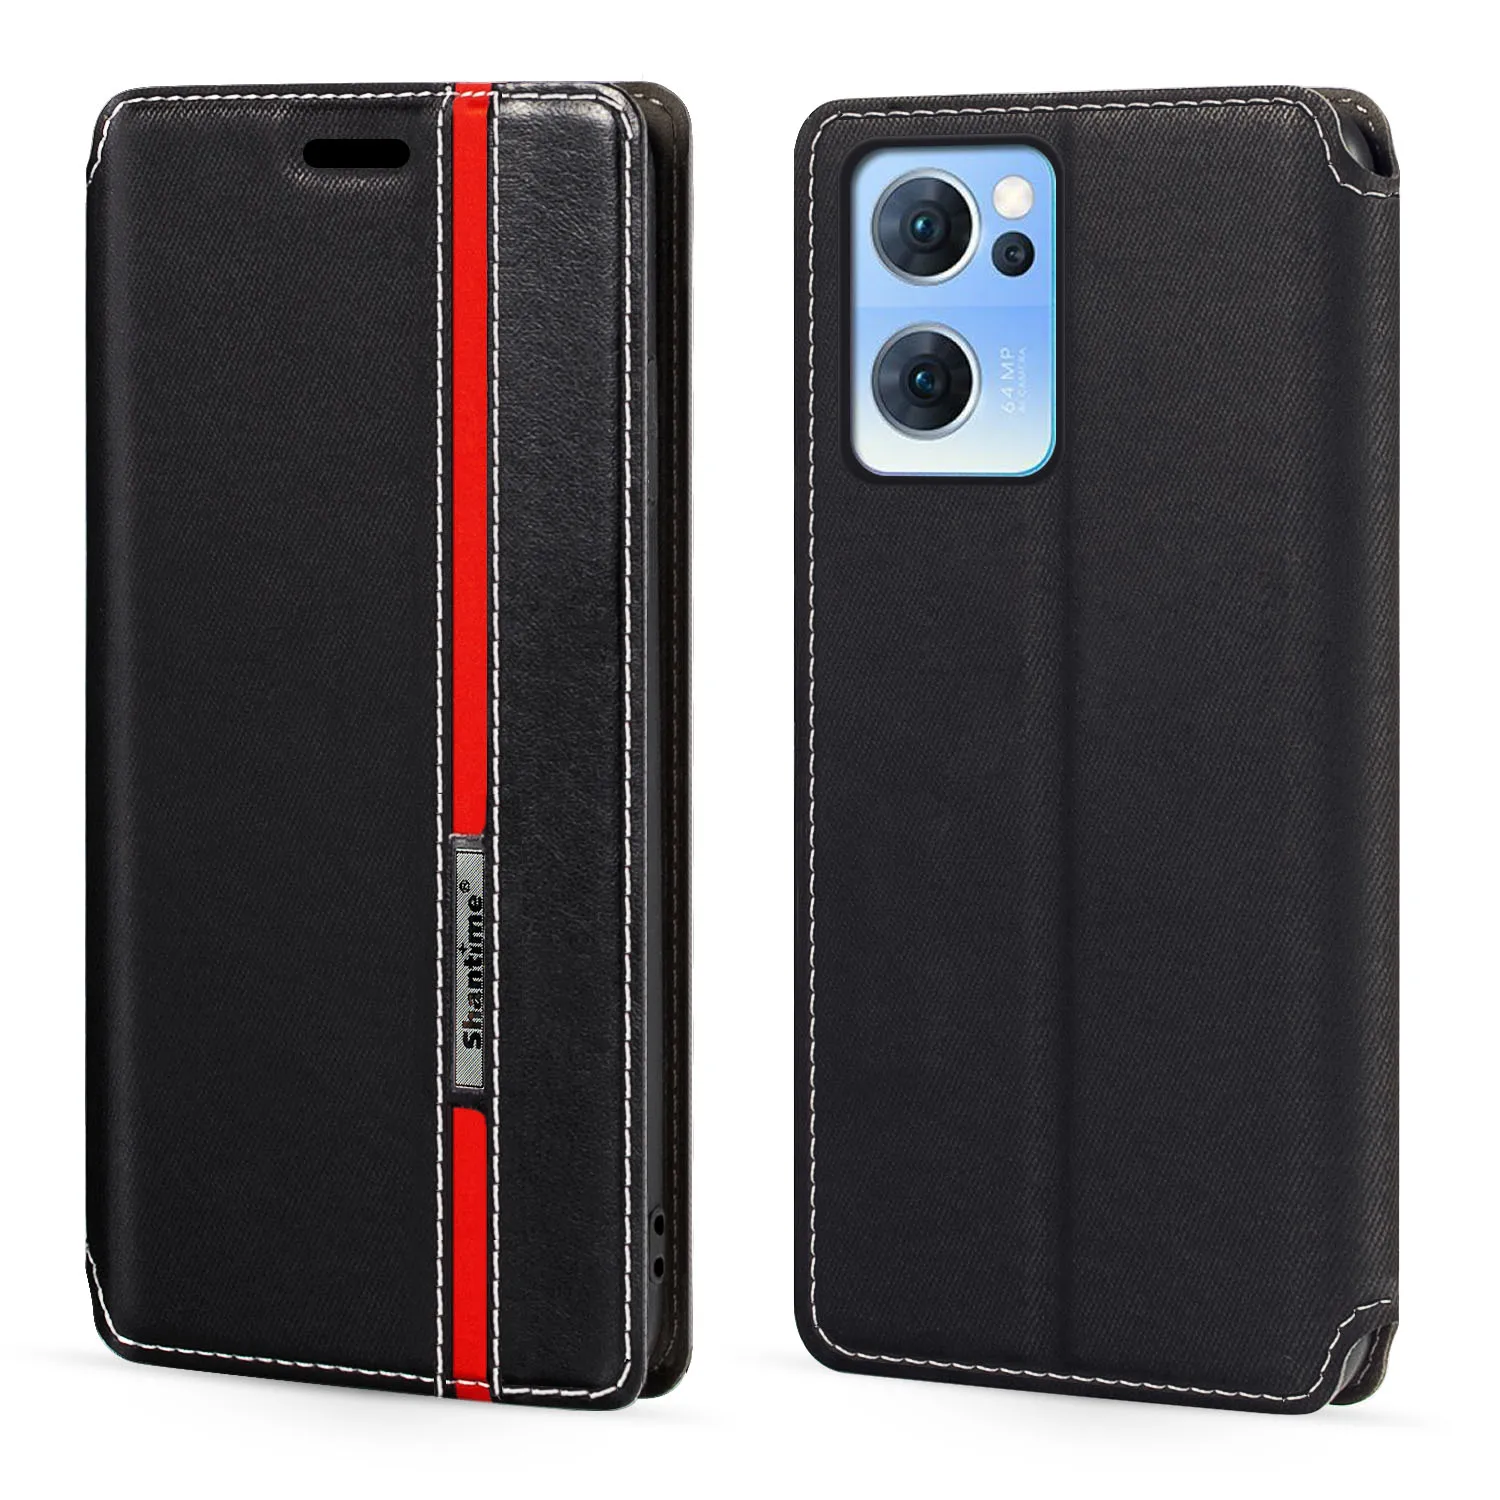 

For OPPO Reno 7 5G China Case Multicolor Magnetic Closure Leather Case Cover with Card Holder For Reno 7 New Year Edition China